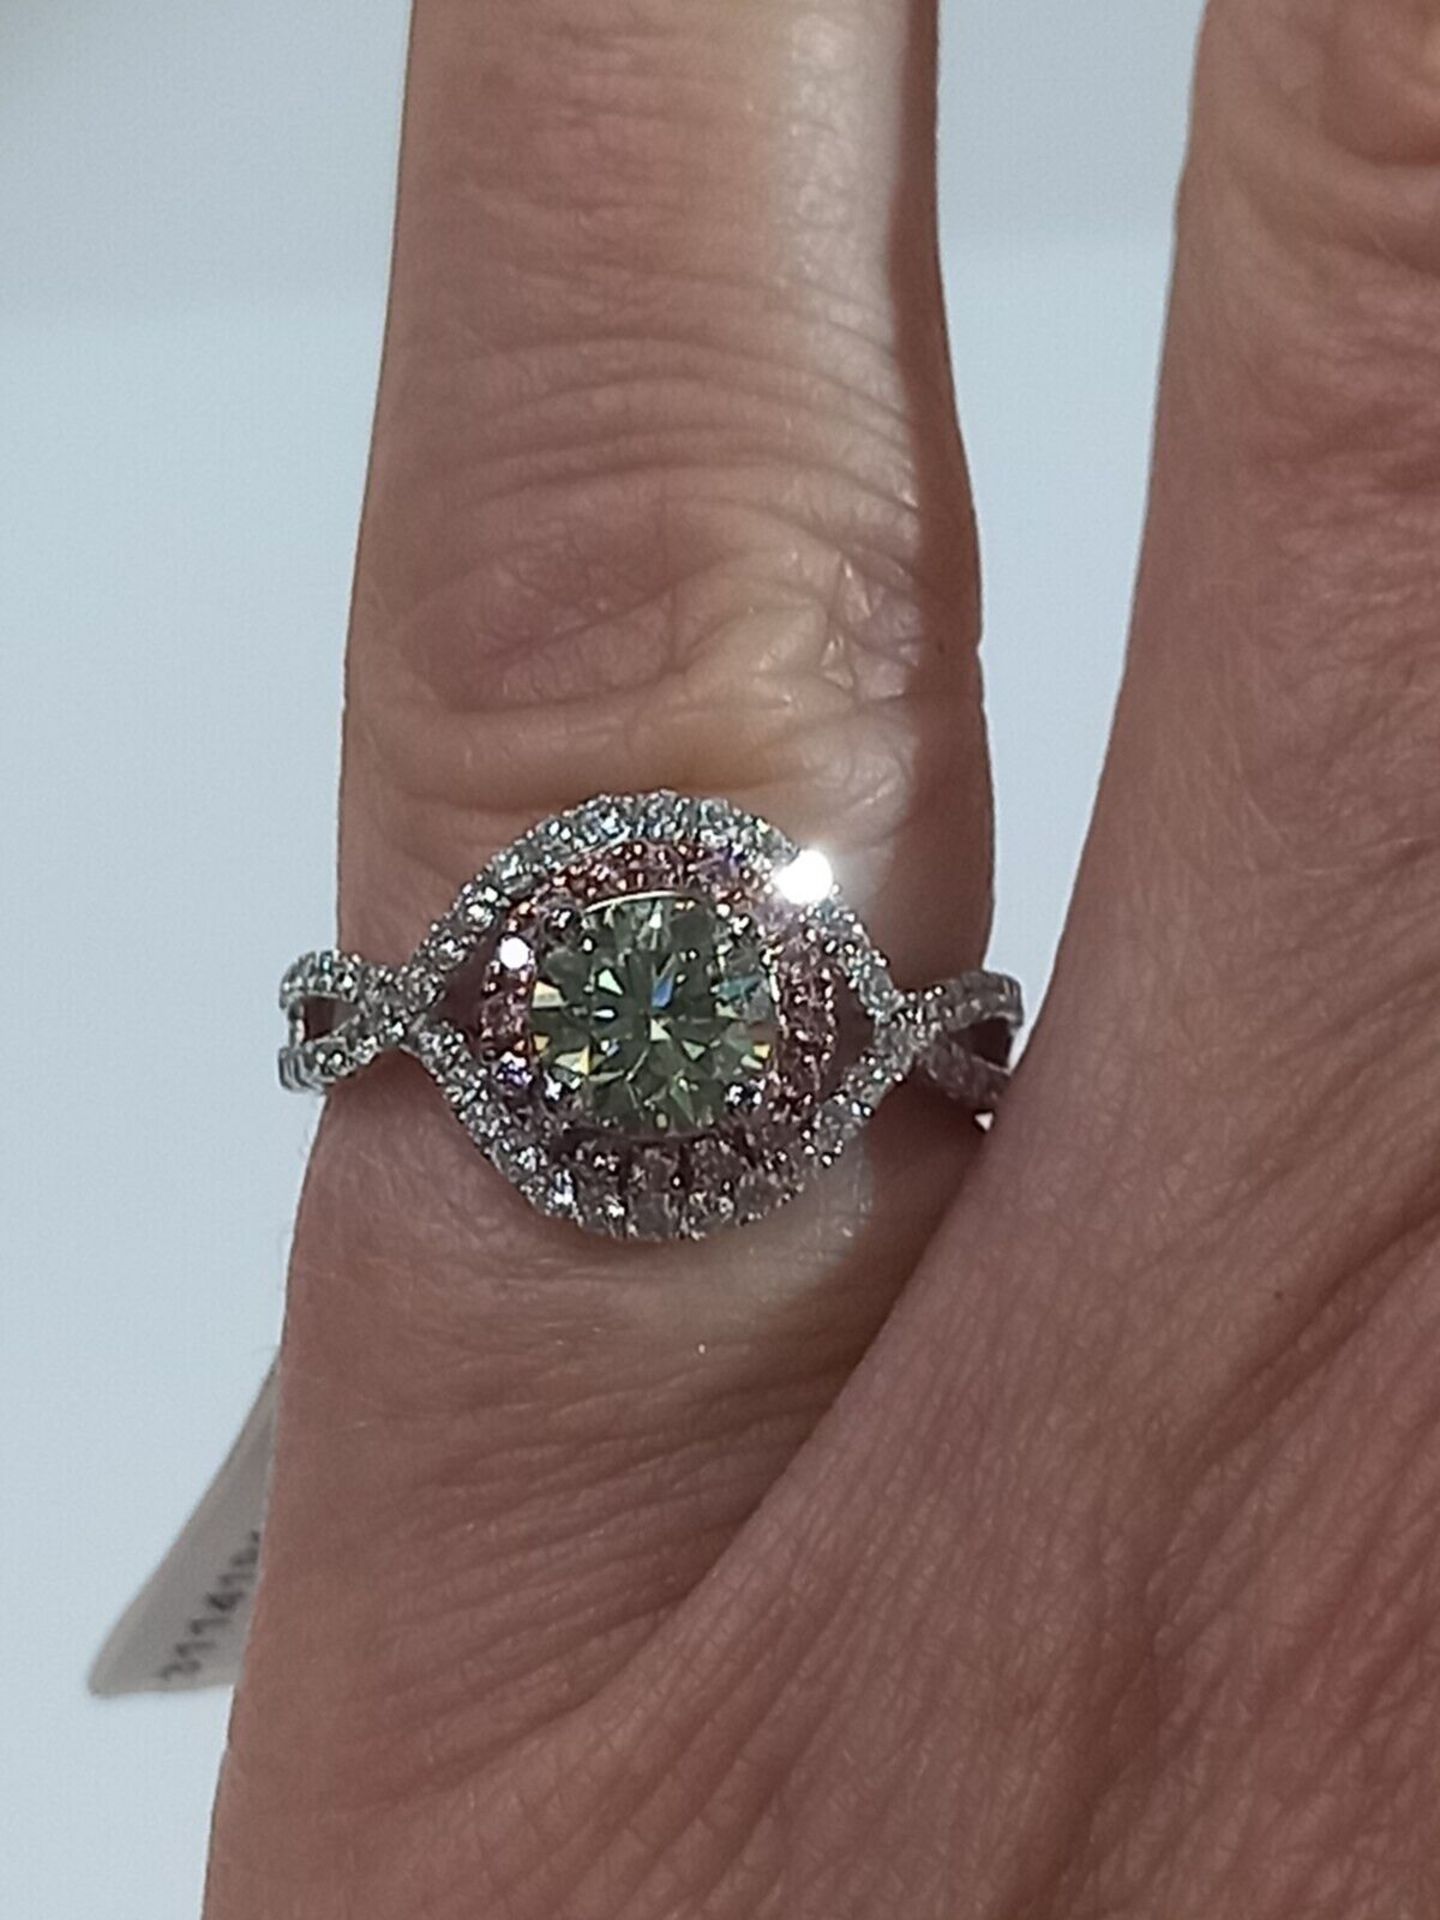 EXQUSITE 1.36CT GREEN/PINK/WHITE DIAMOND HALLO SET ENGAGEMENT RING + VALUATION CERT OF £12995 - Image 7 of 9